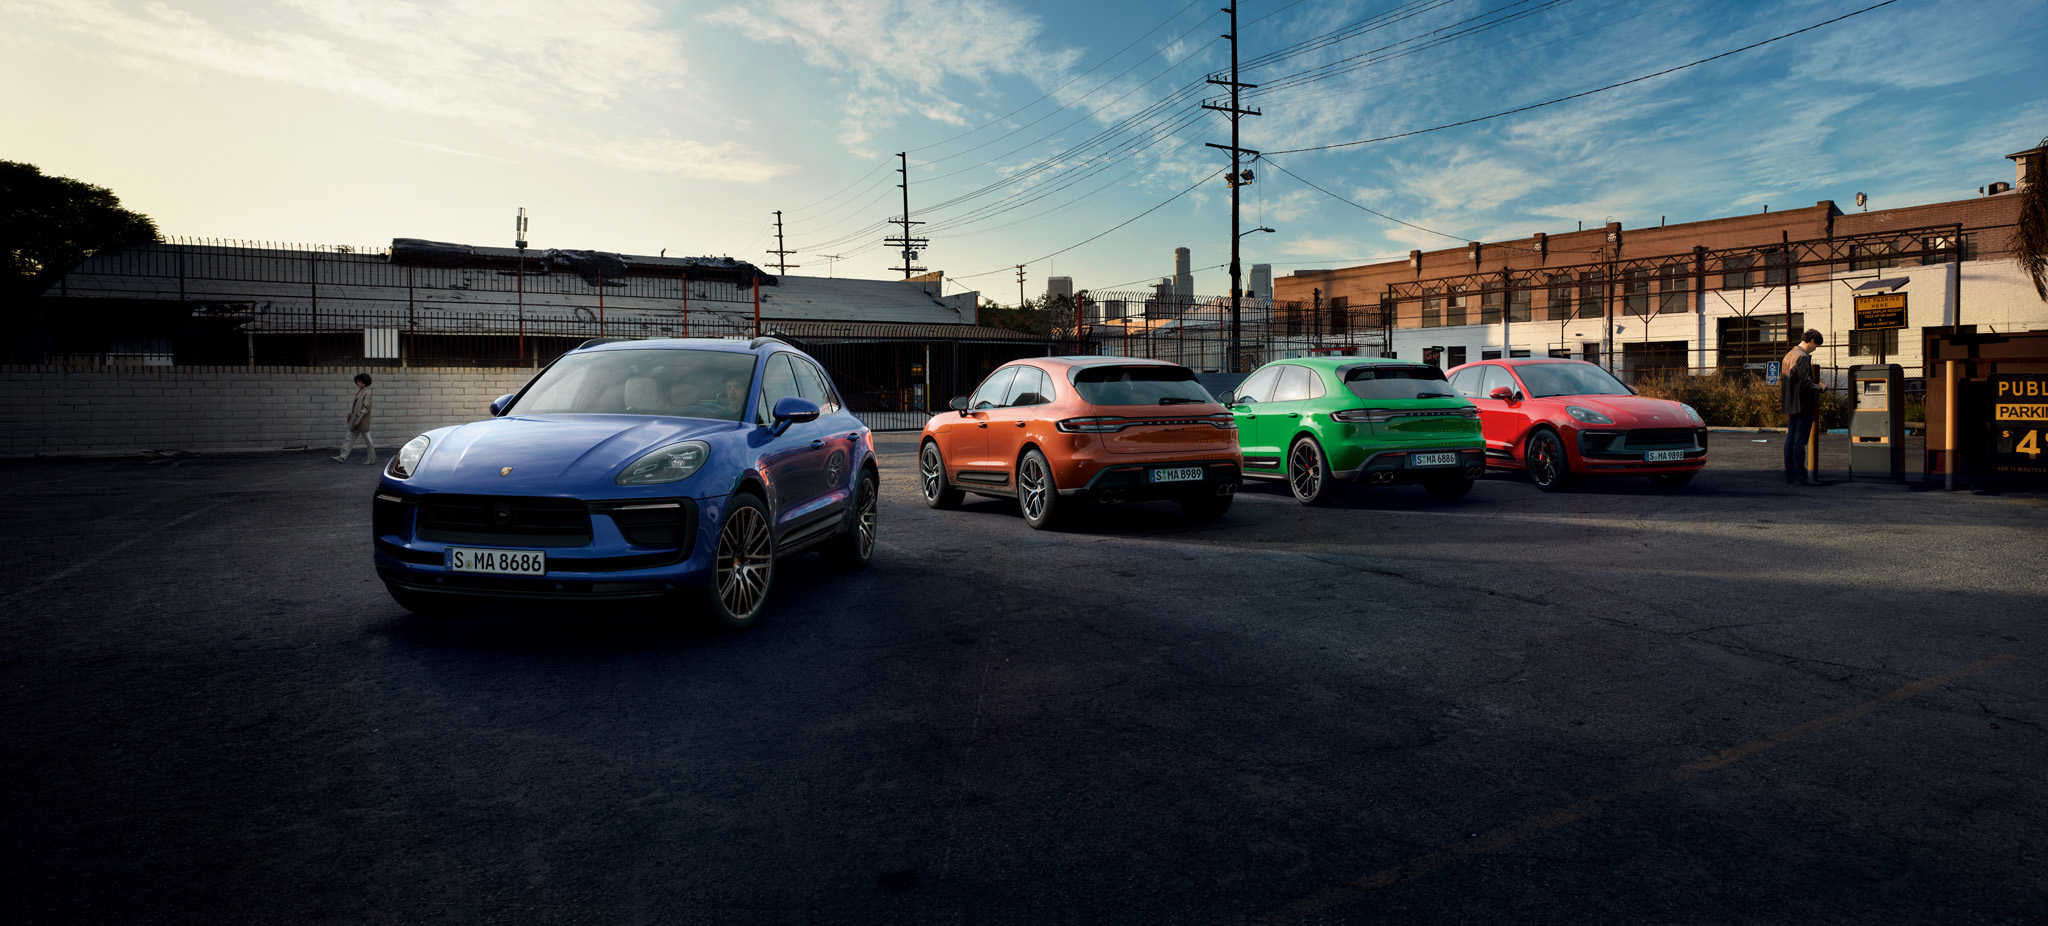 Colourful line-up of the Porsche Macan range in urban location